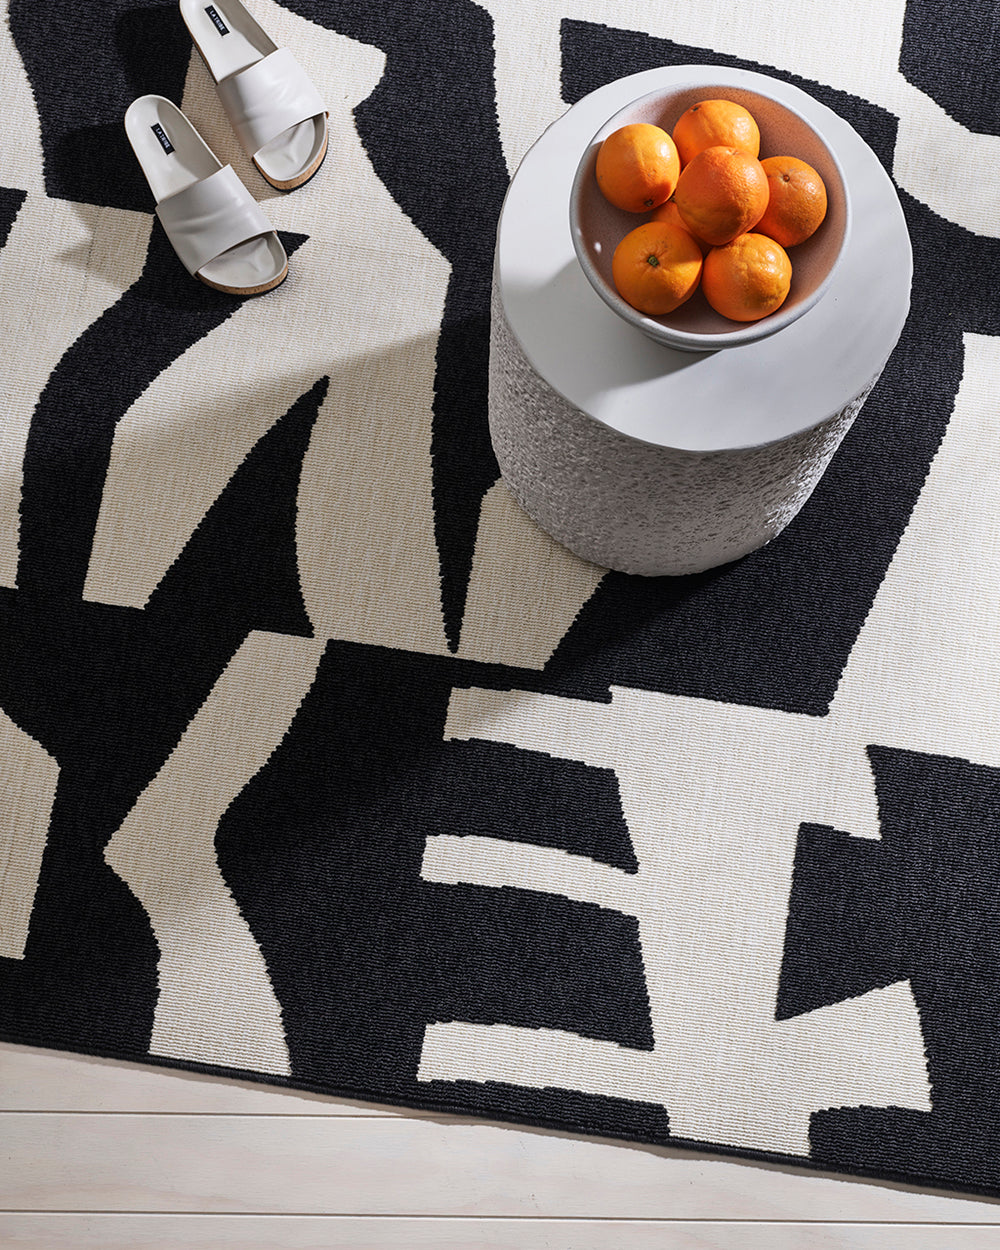 copacabana black and ecru rug with slide shoes and a bowl of oranges on a stone stool